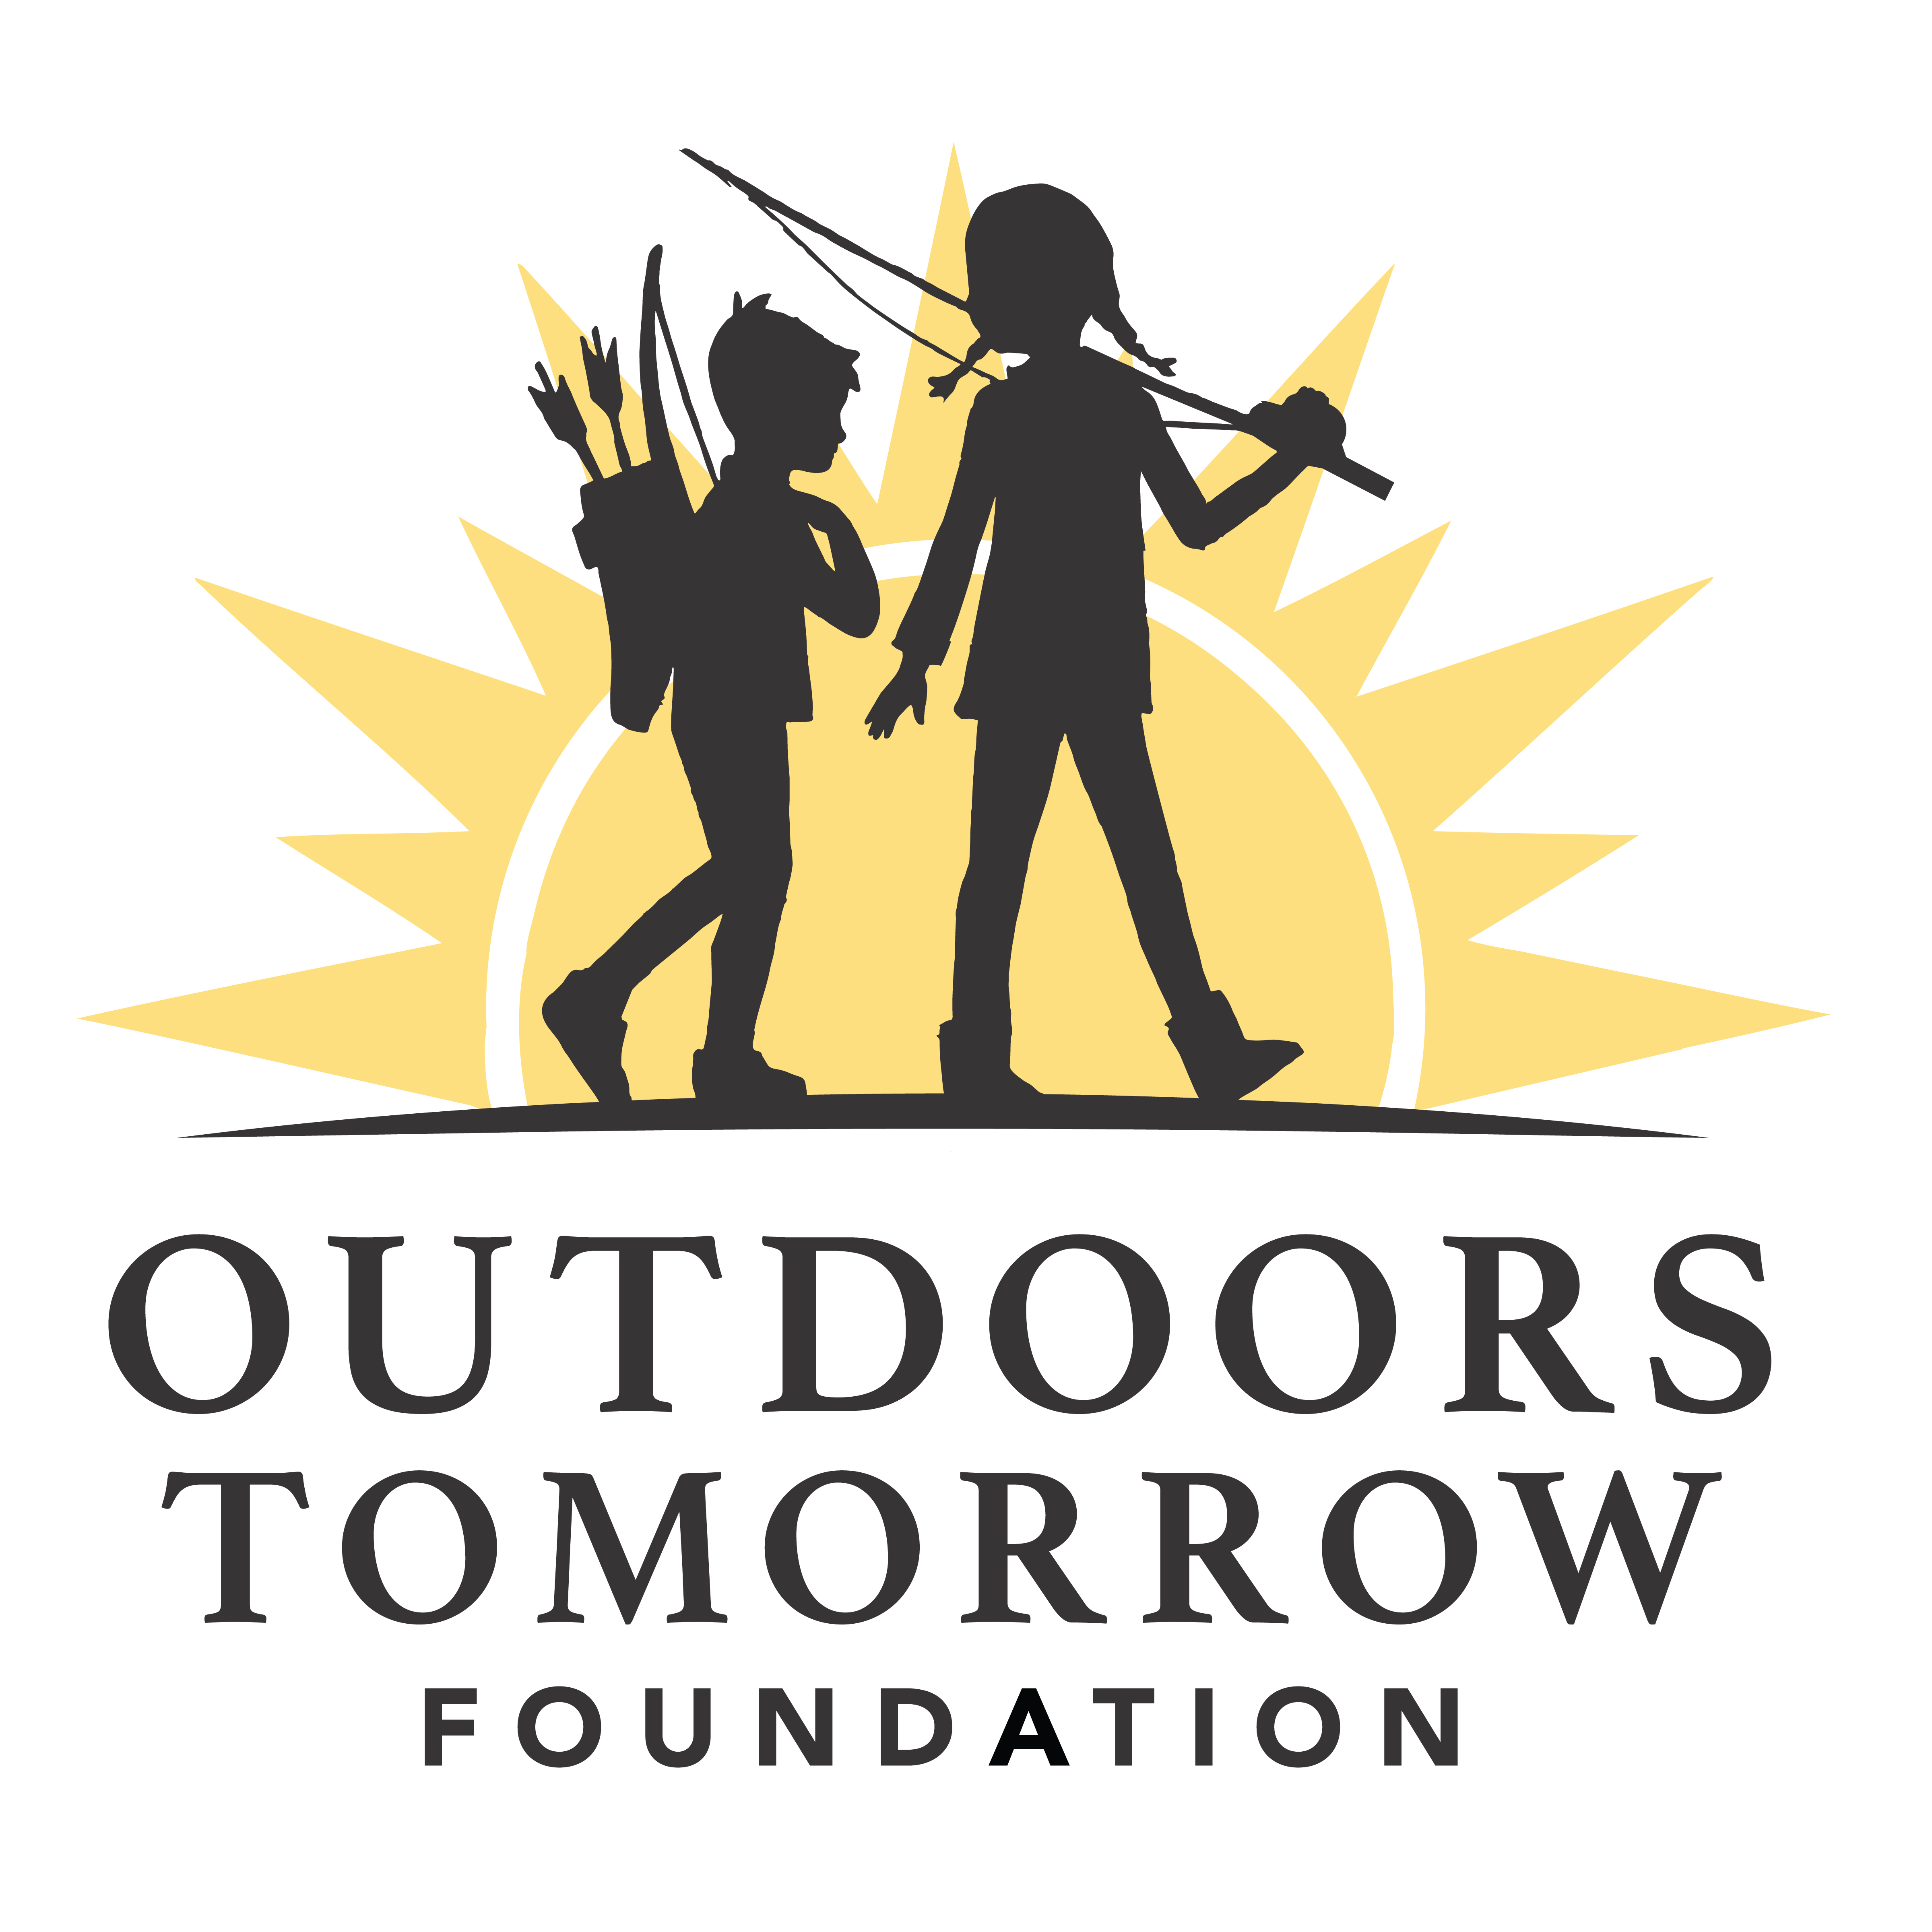 OUTDOORS TOMORROW FOUNDATION LAUNCHES PARTNERSHIP WITH ARKANSAS GAME AND FISH COMMISSION